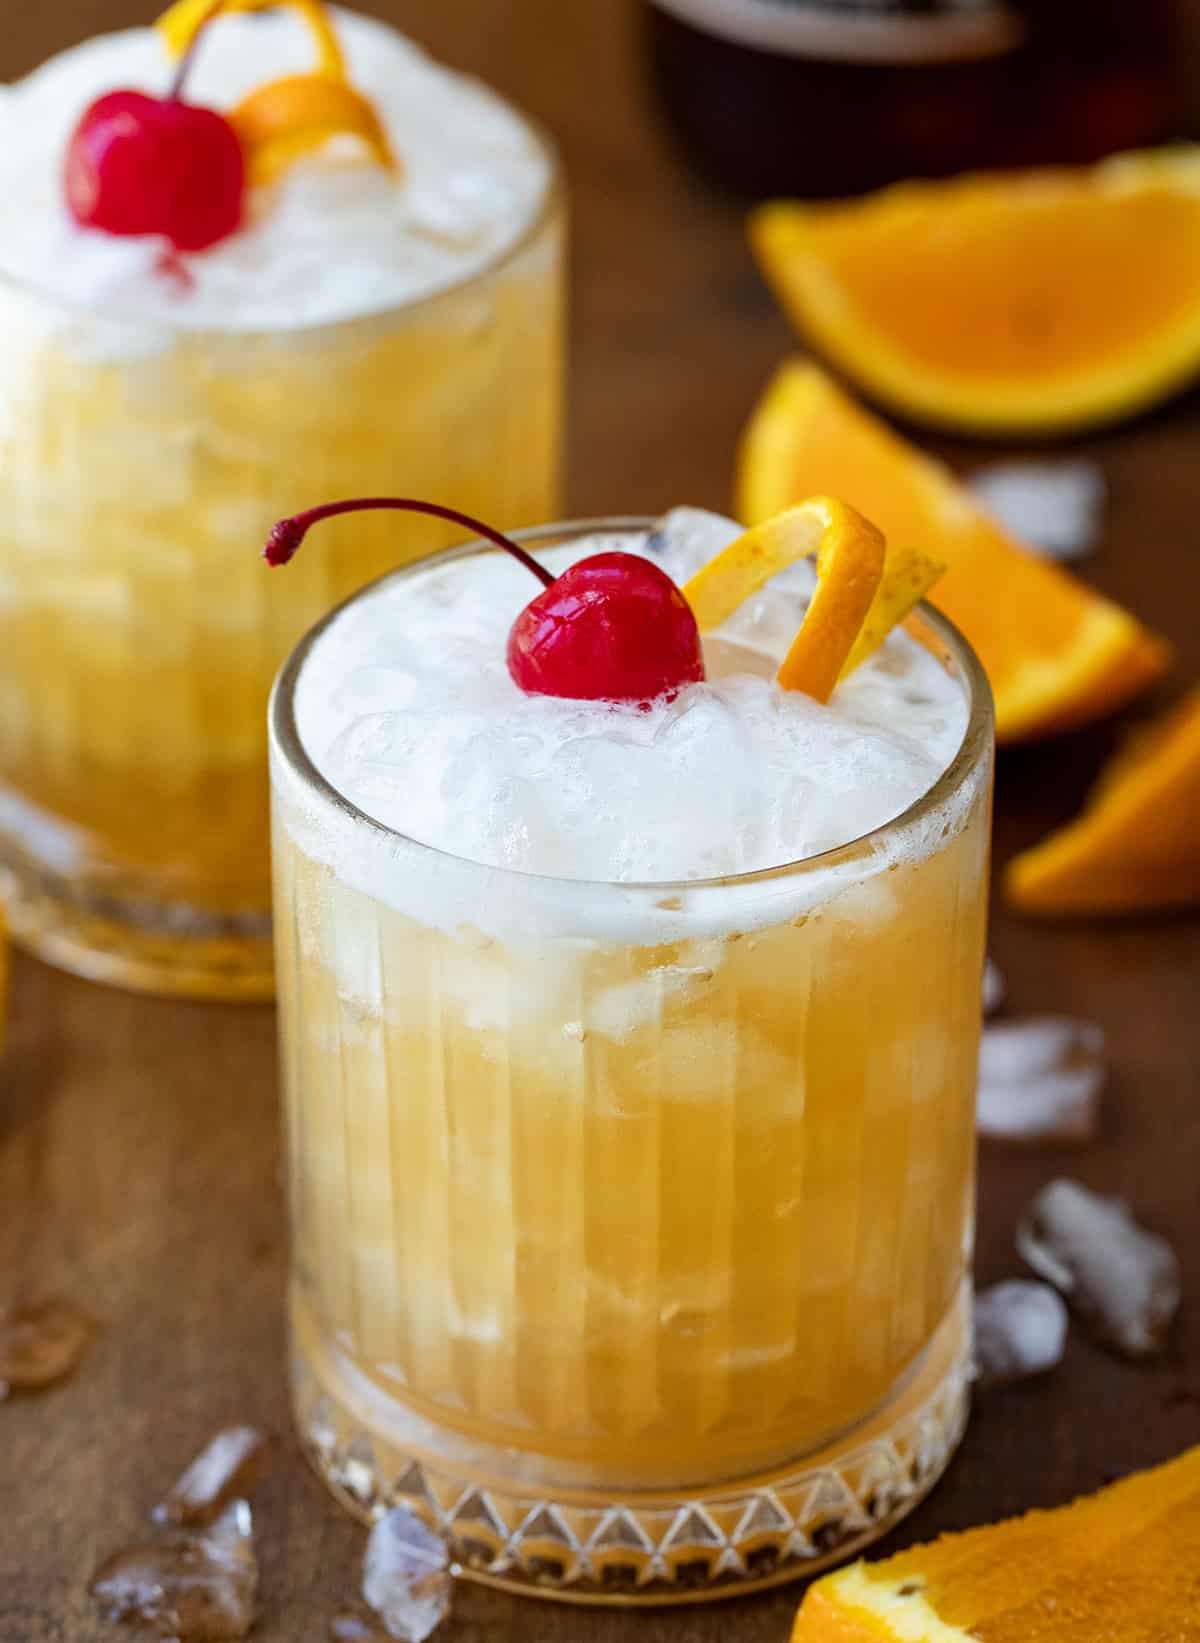 Two Amaretto Sour's on a wooden table with ice and oranges around.